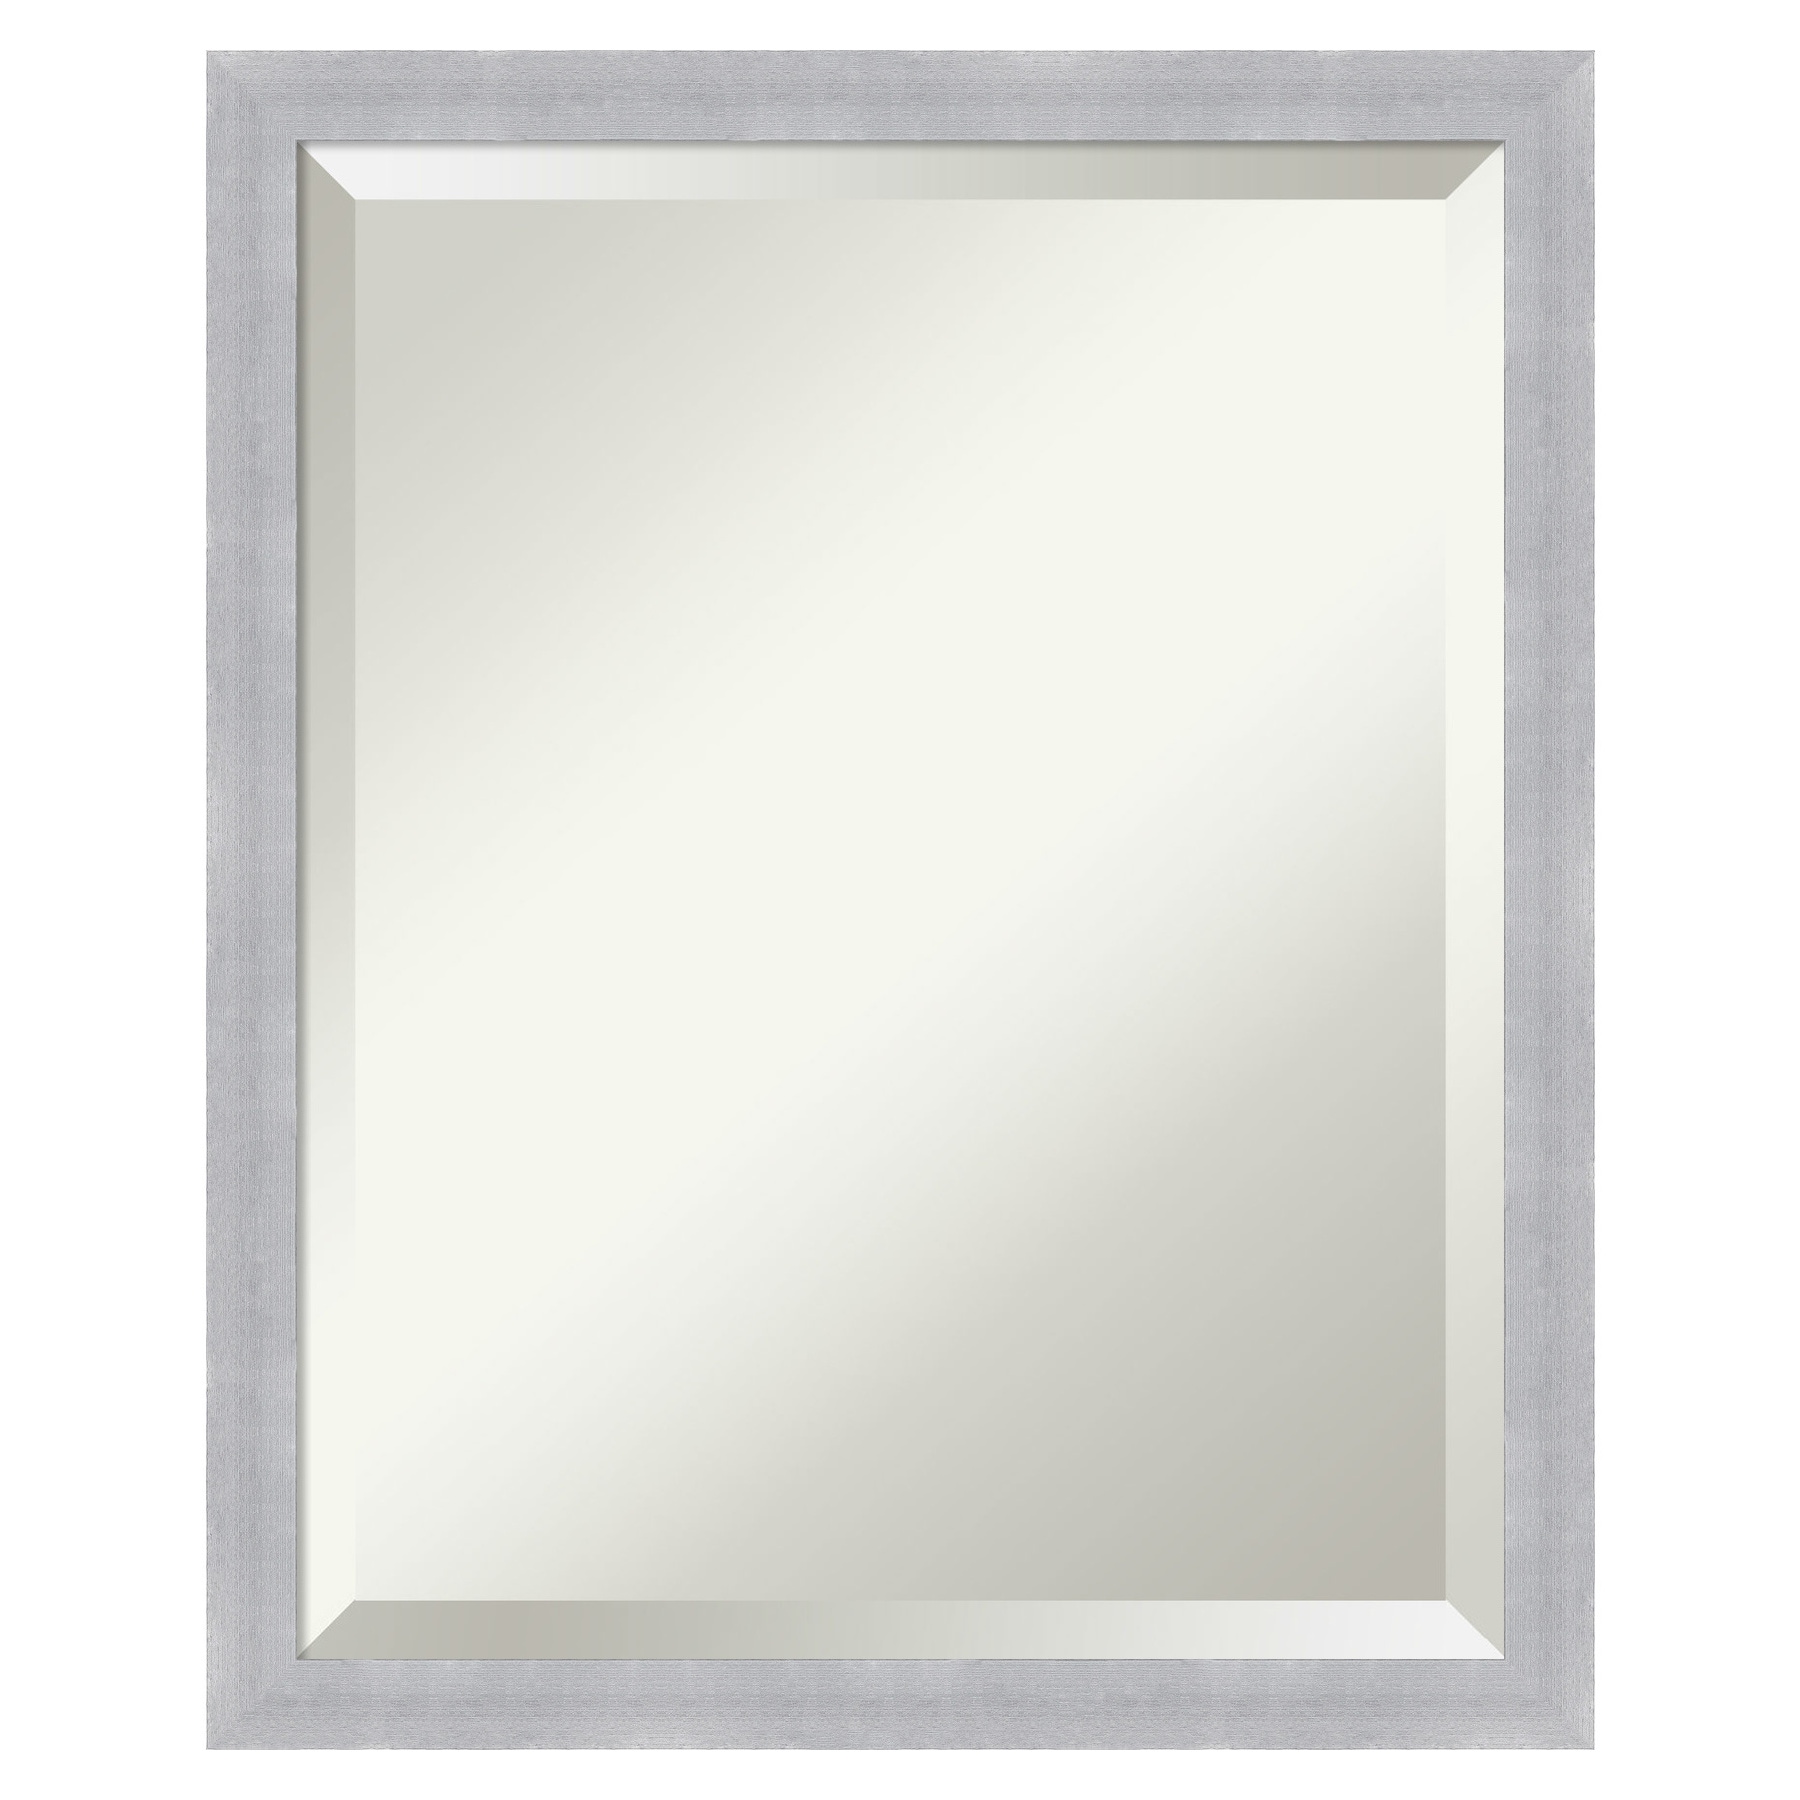 Neues Produkt-Free-Shipping-Festival im Gange! Amanti Art Grace Mirrors Brushed Mirror Wall Matte the Silver 21.88-in department Nickel H 17.88-in at x W in Framed